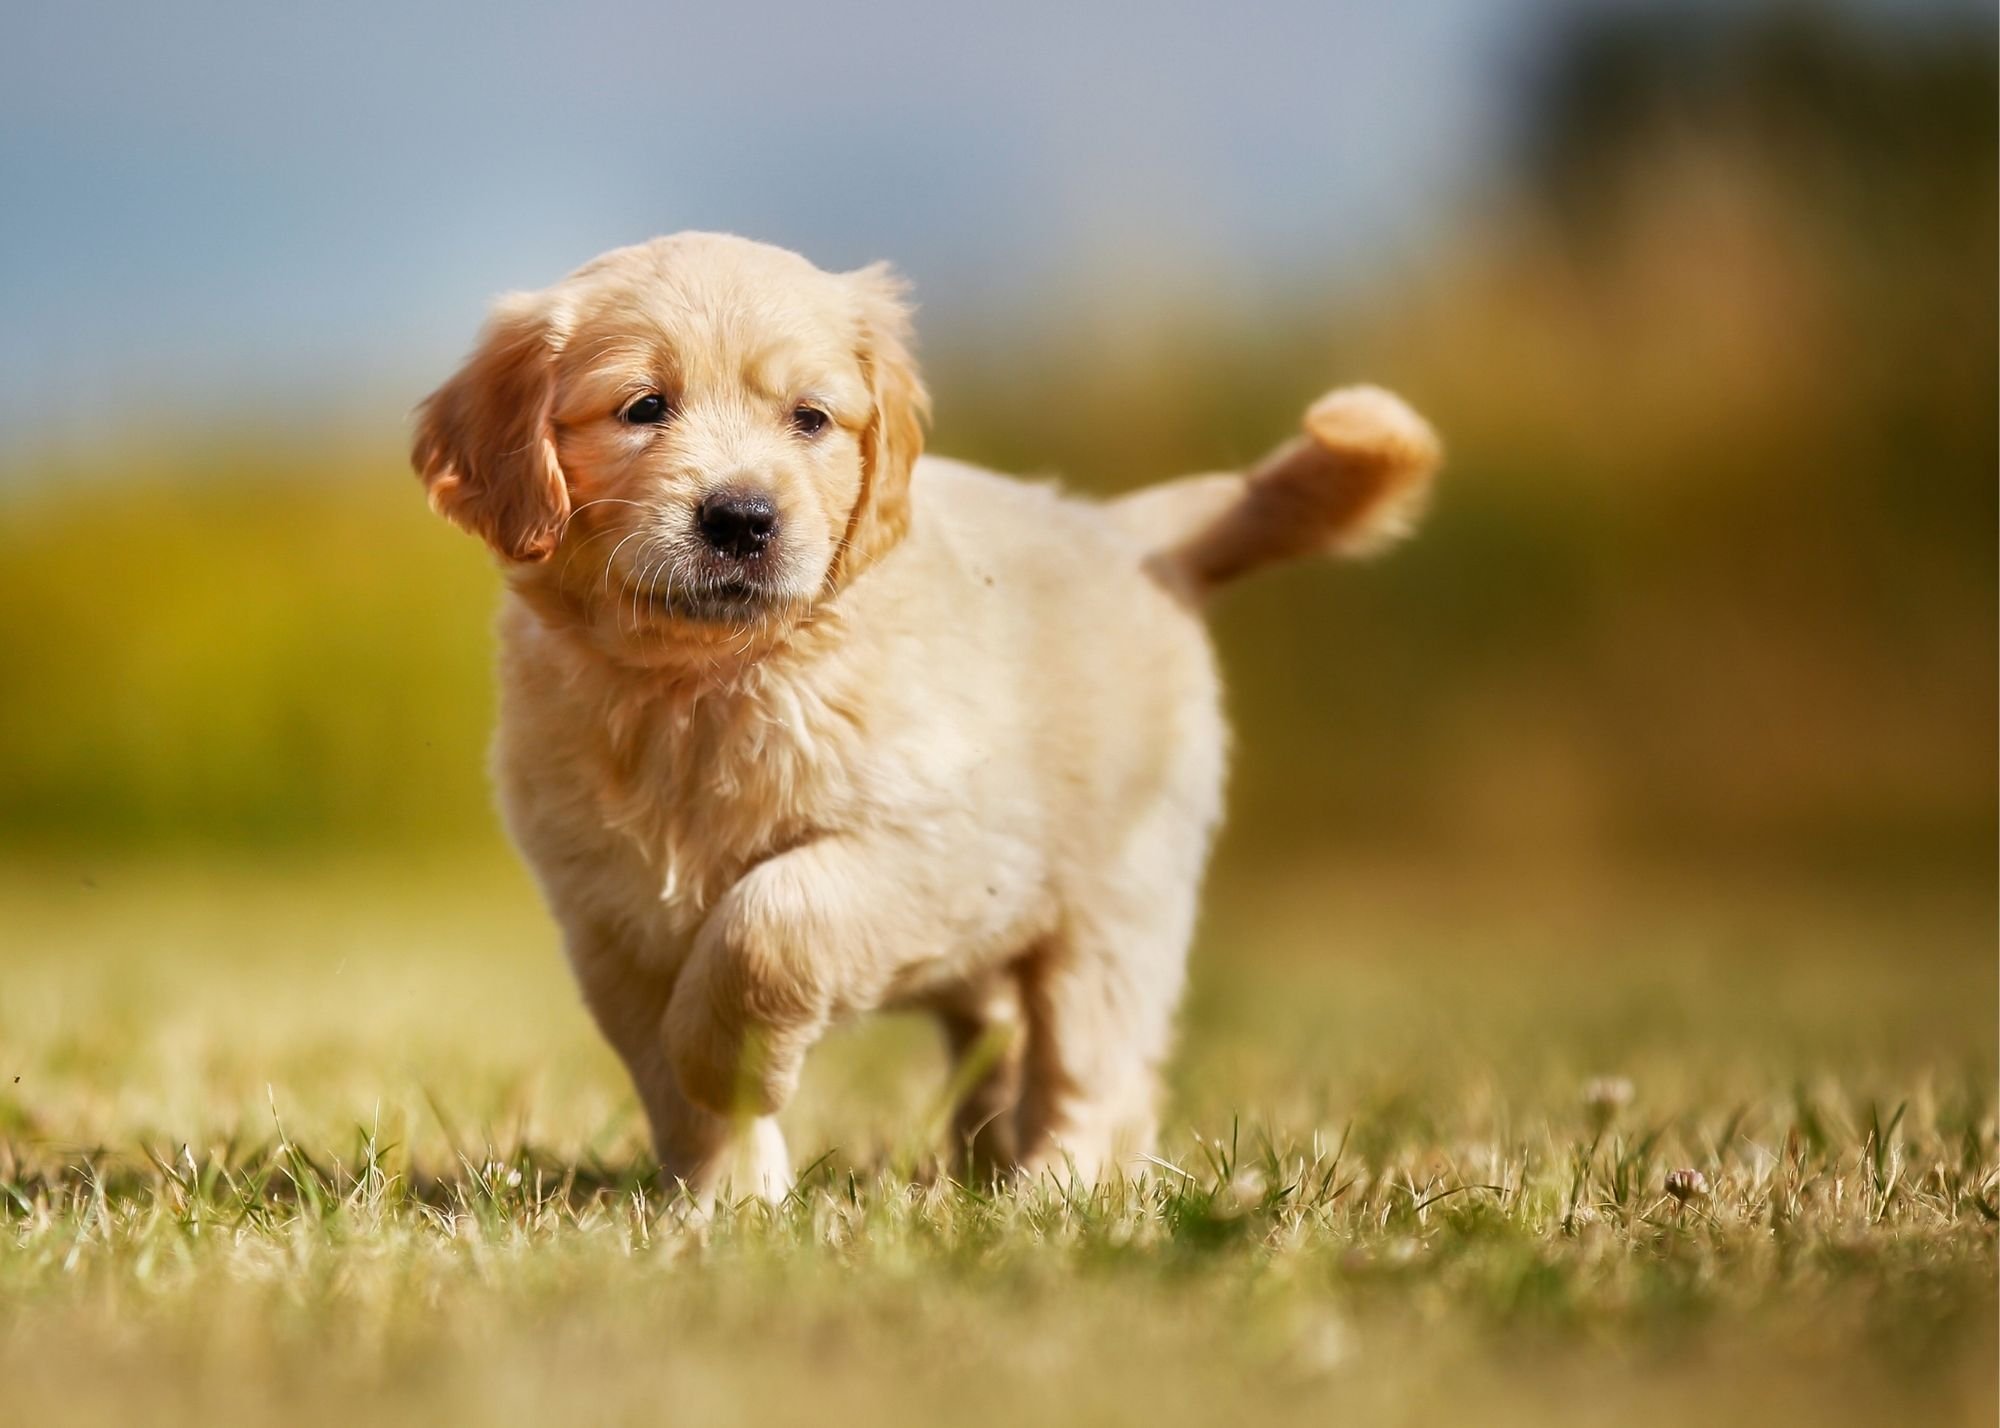 A Guide To Puppy Breeds: Golden Retrievers! — The Puppy Academy